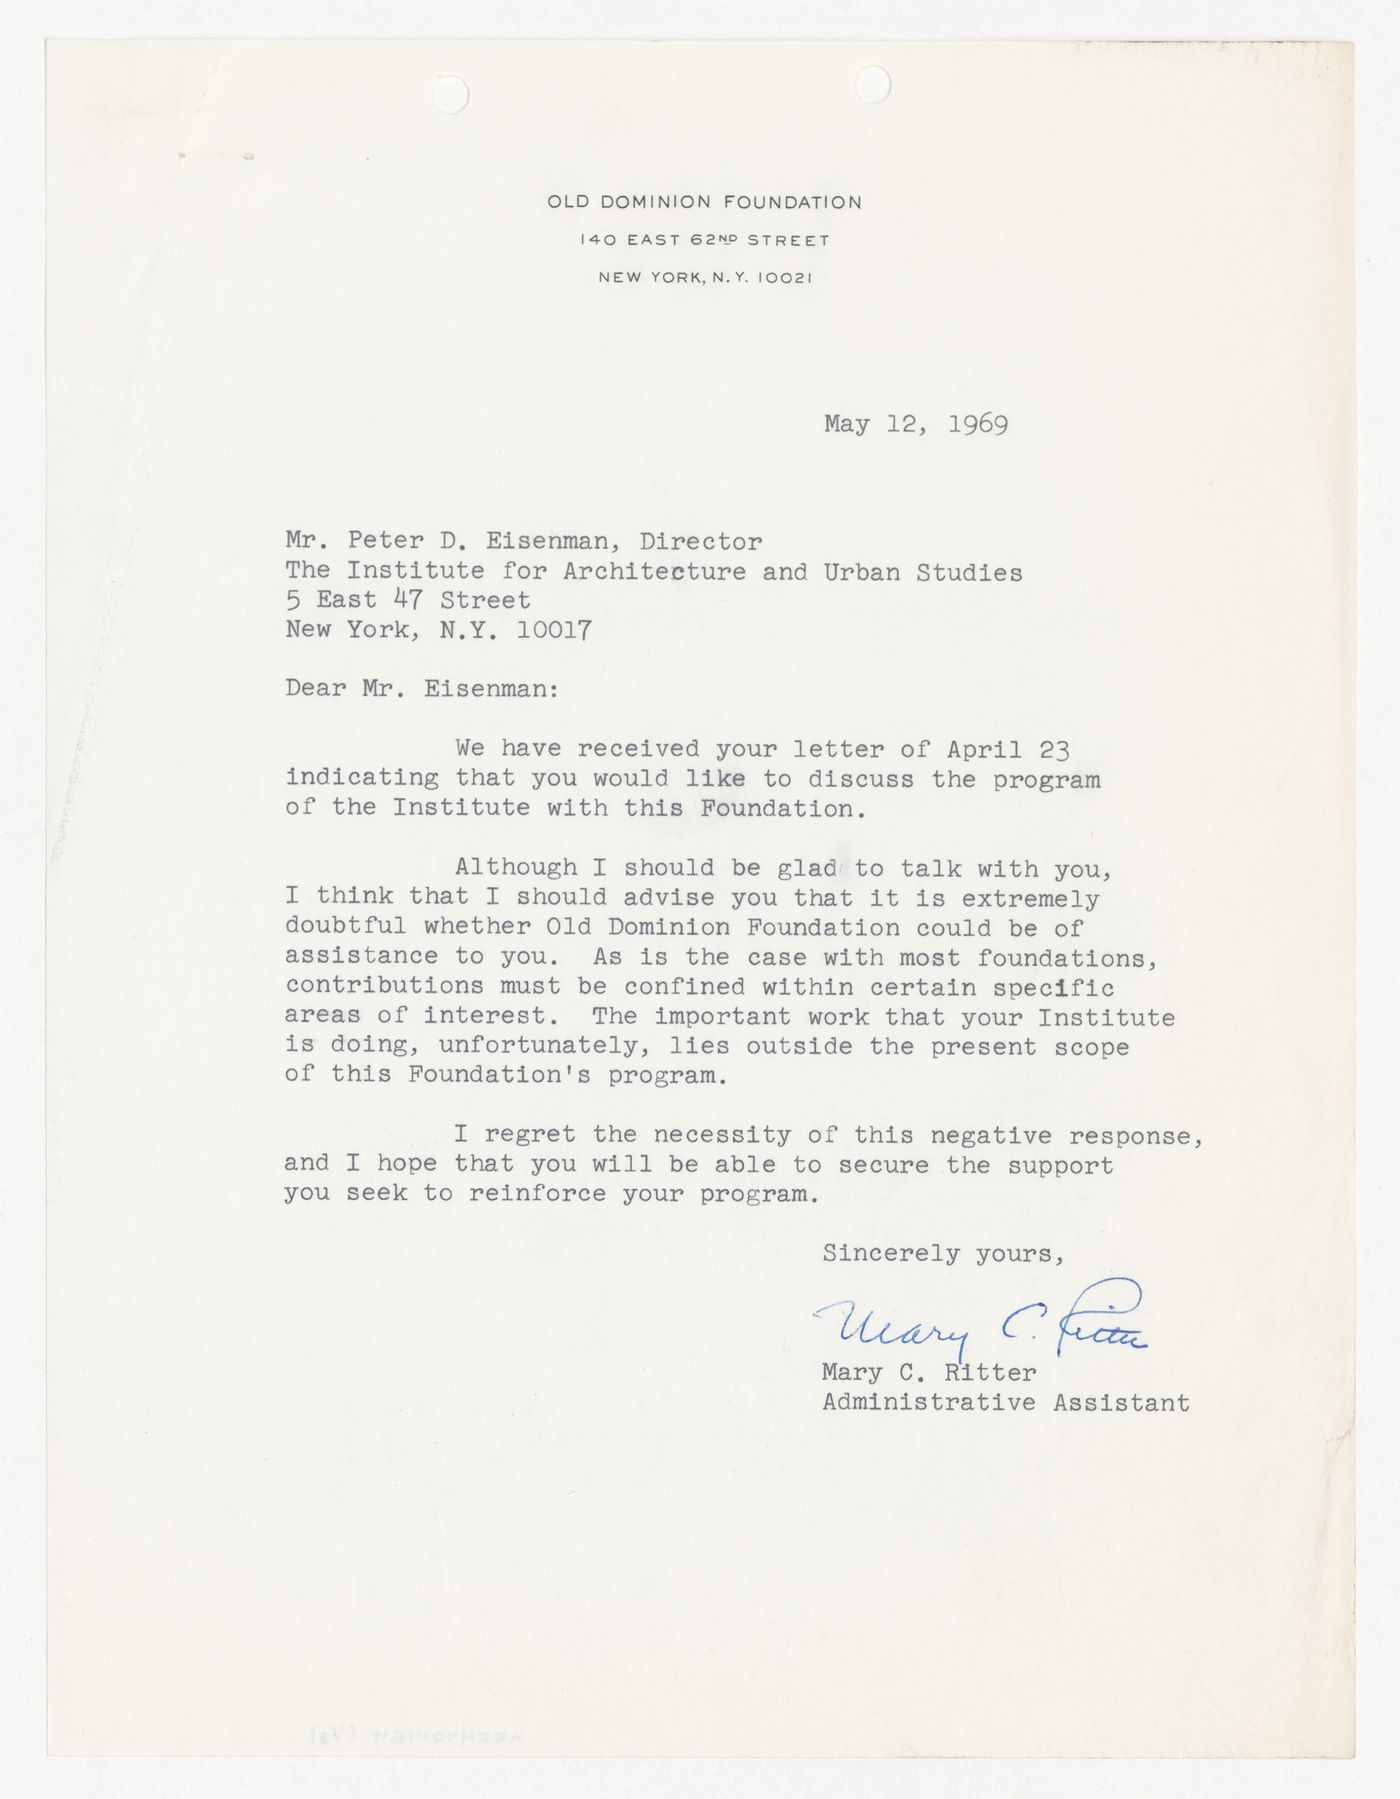 Letter from Mary C. Ritter to Peter D. Eisenman responding to donation request made by Eisenman with attached copy of original letter